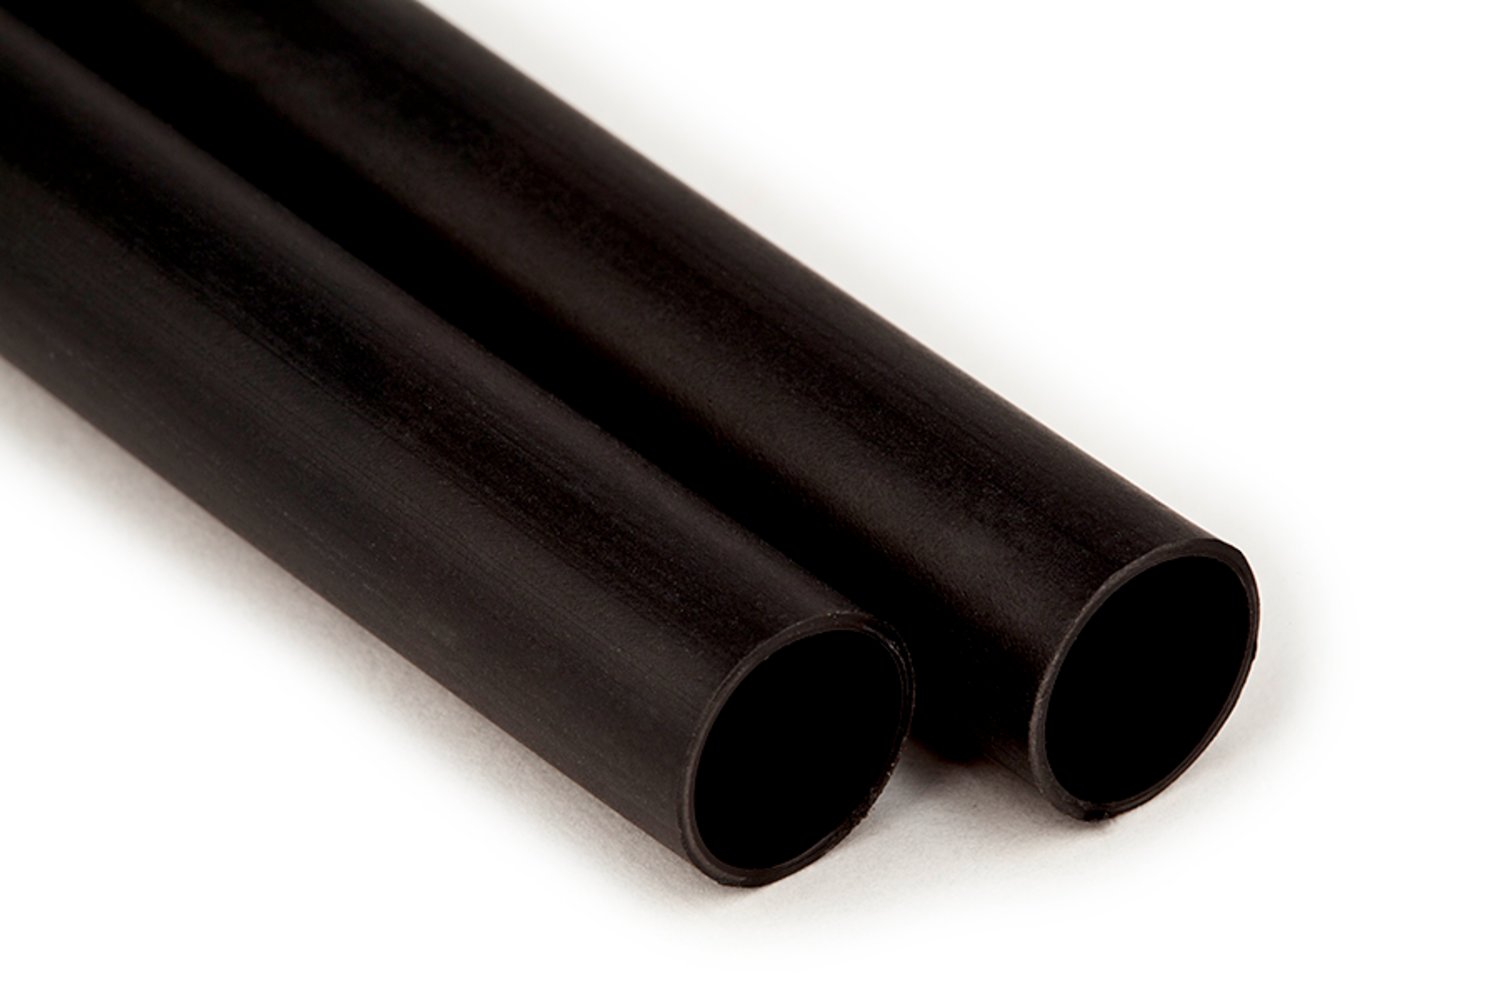 7000133587 - 3M Heat Shrink Multiple-Wall Polyolefin Tubing EPS400-.700-48"-Black-5
Pcs, 48 in length sticks, 5 pieces/case